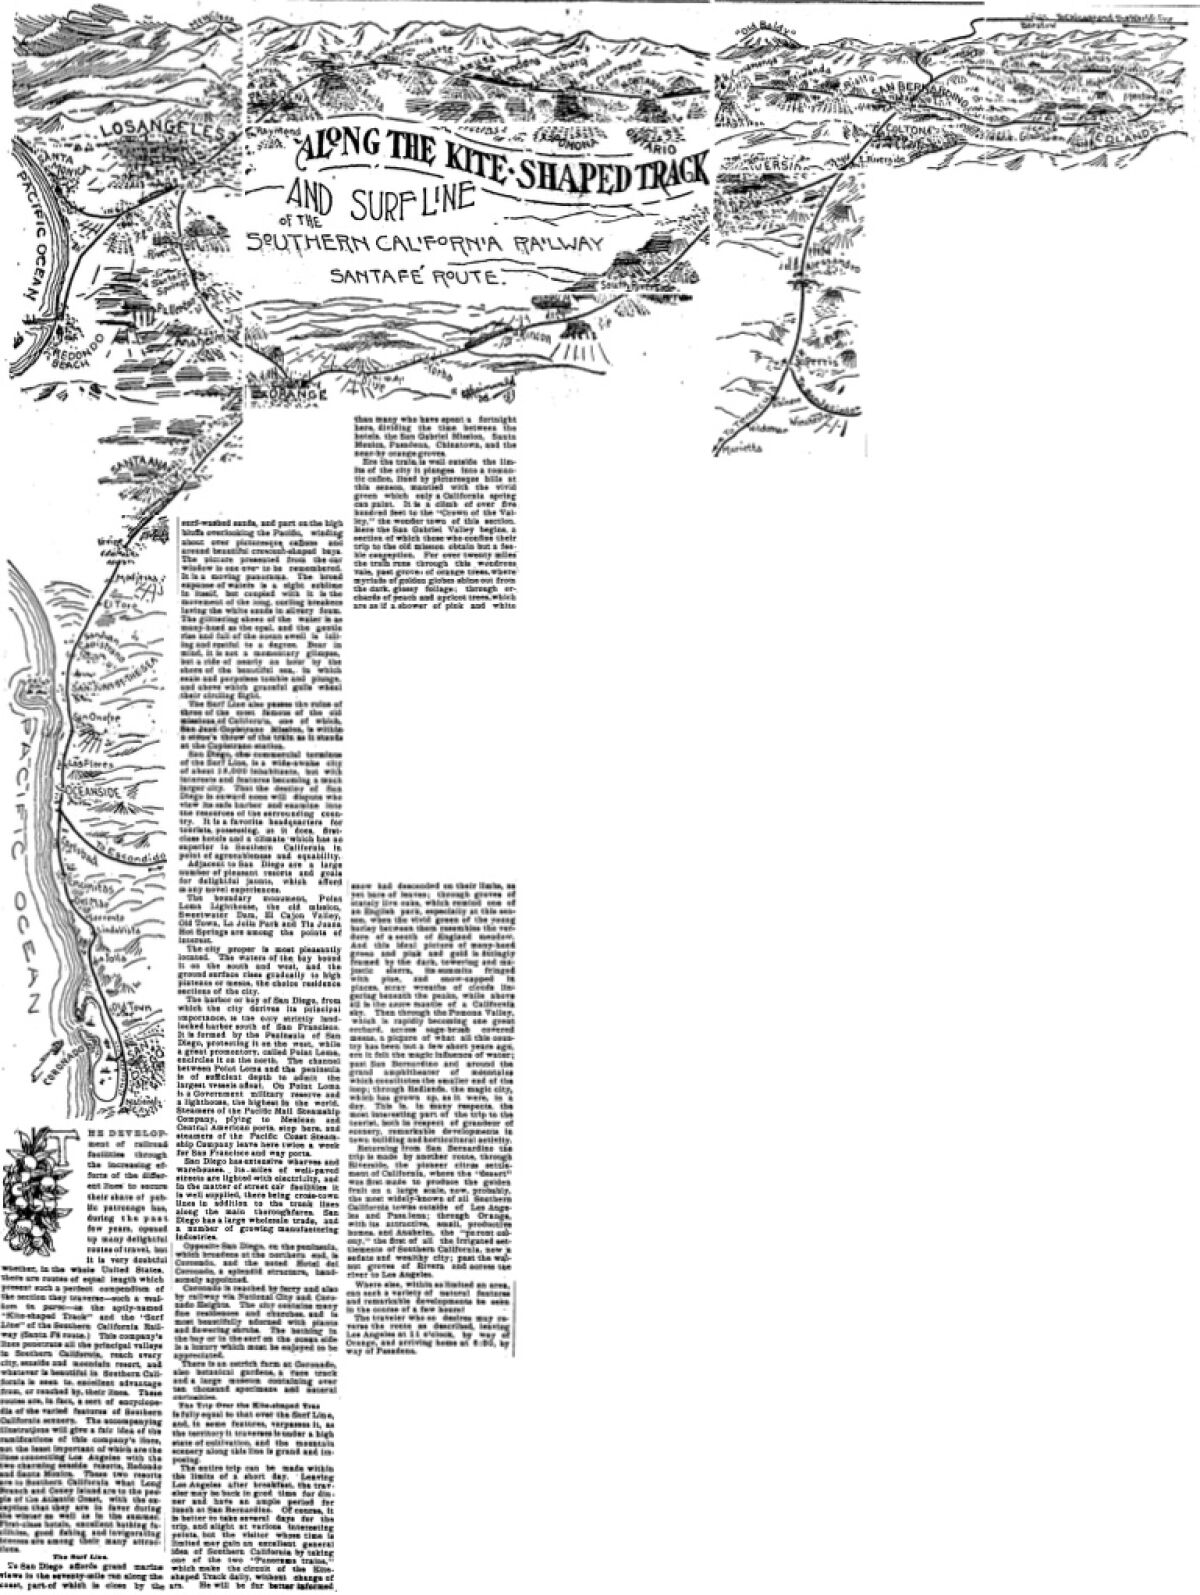 Reproduction of a map accompanying an article from the Feb. 26, 1893, Los Angeles Times.